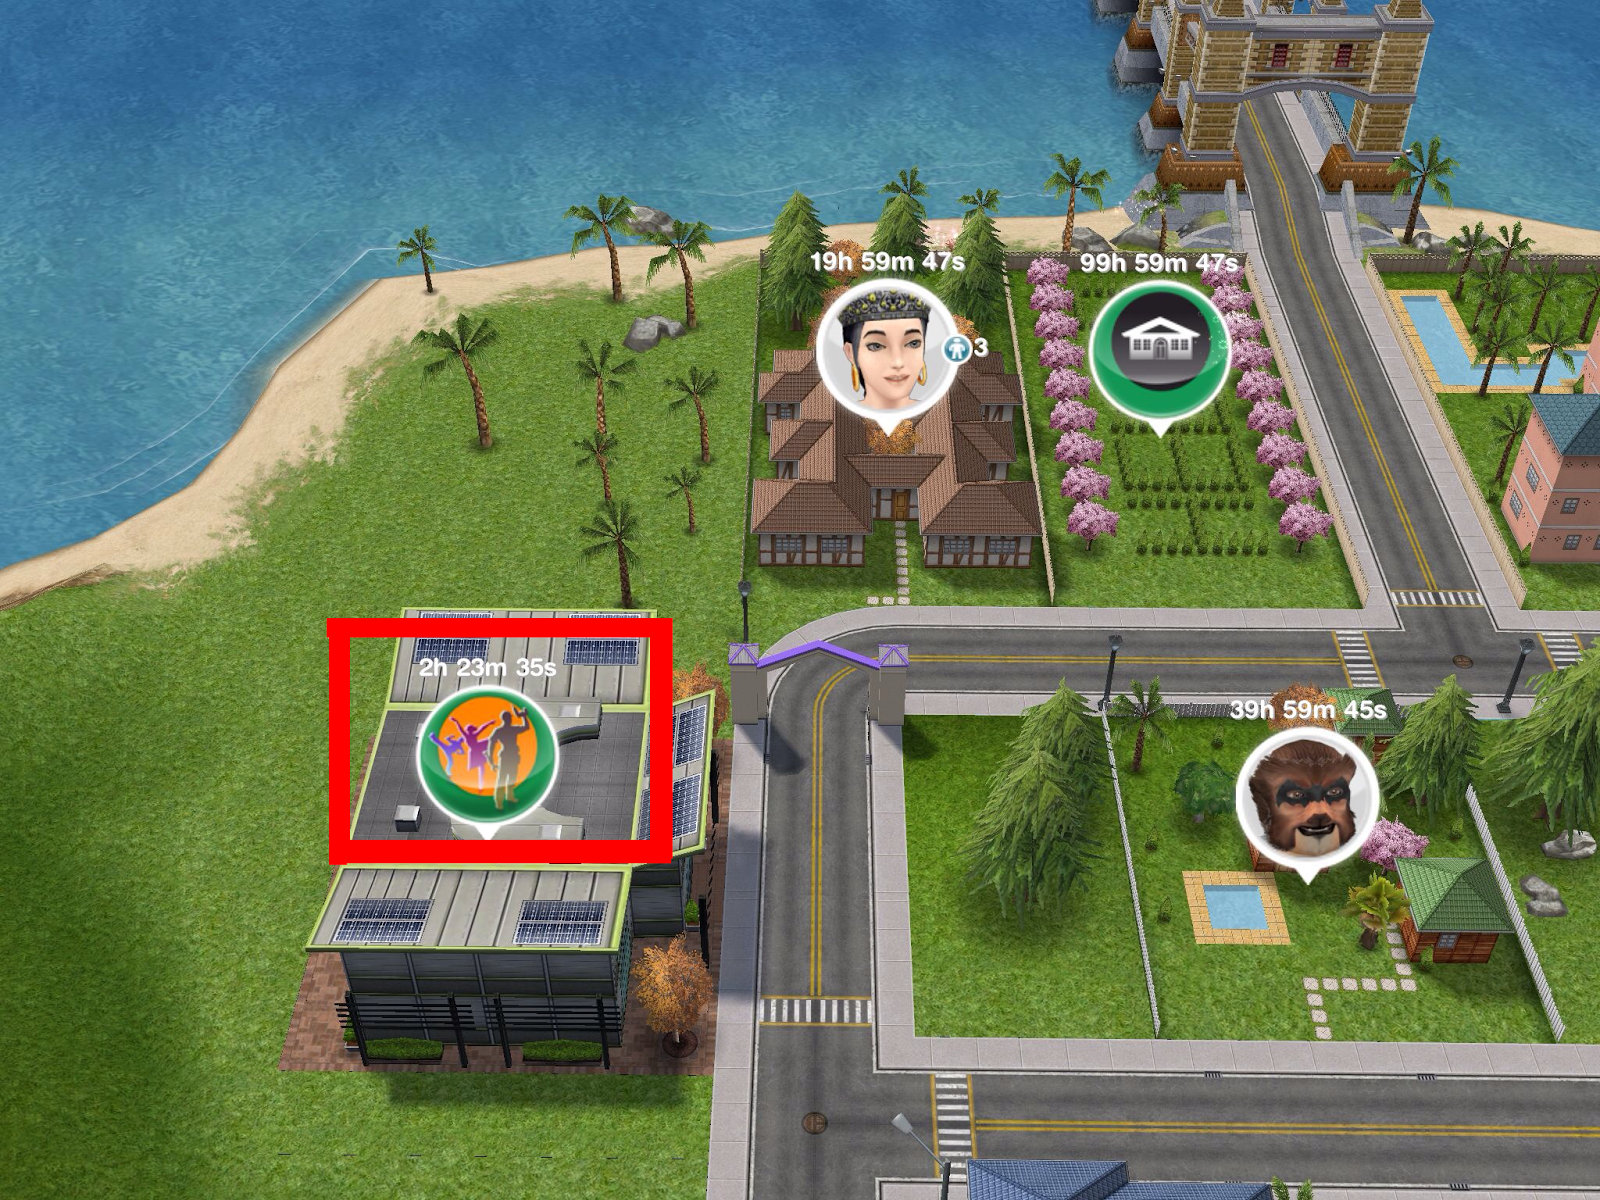 The Sims Free Play Thailand 2015 ...